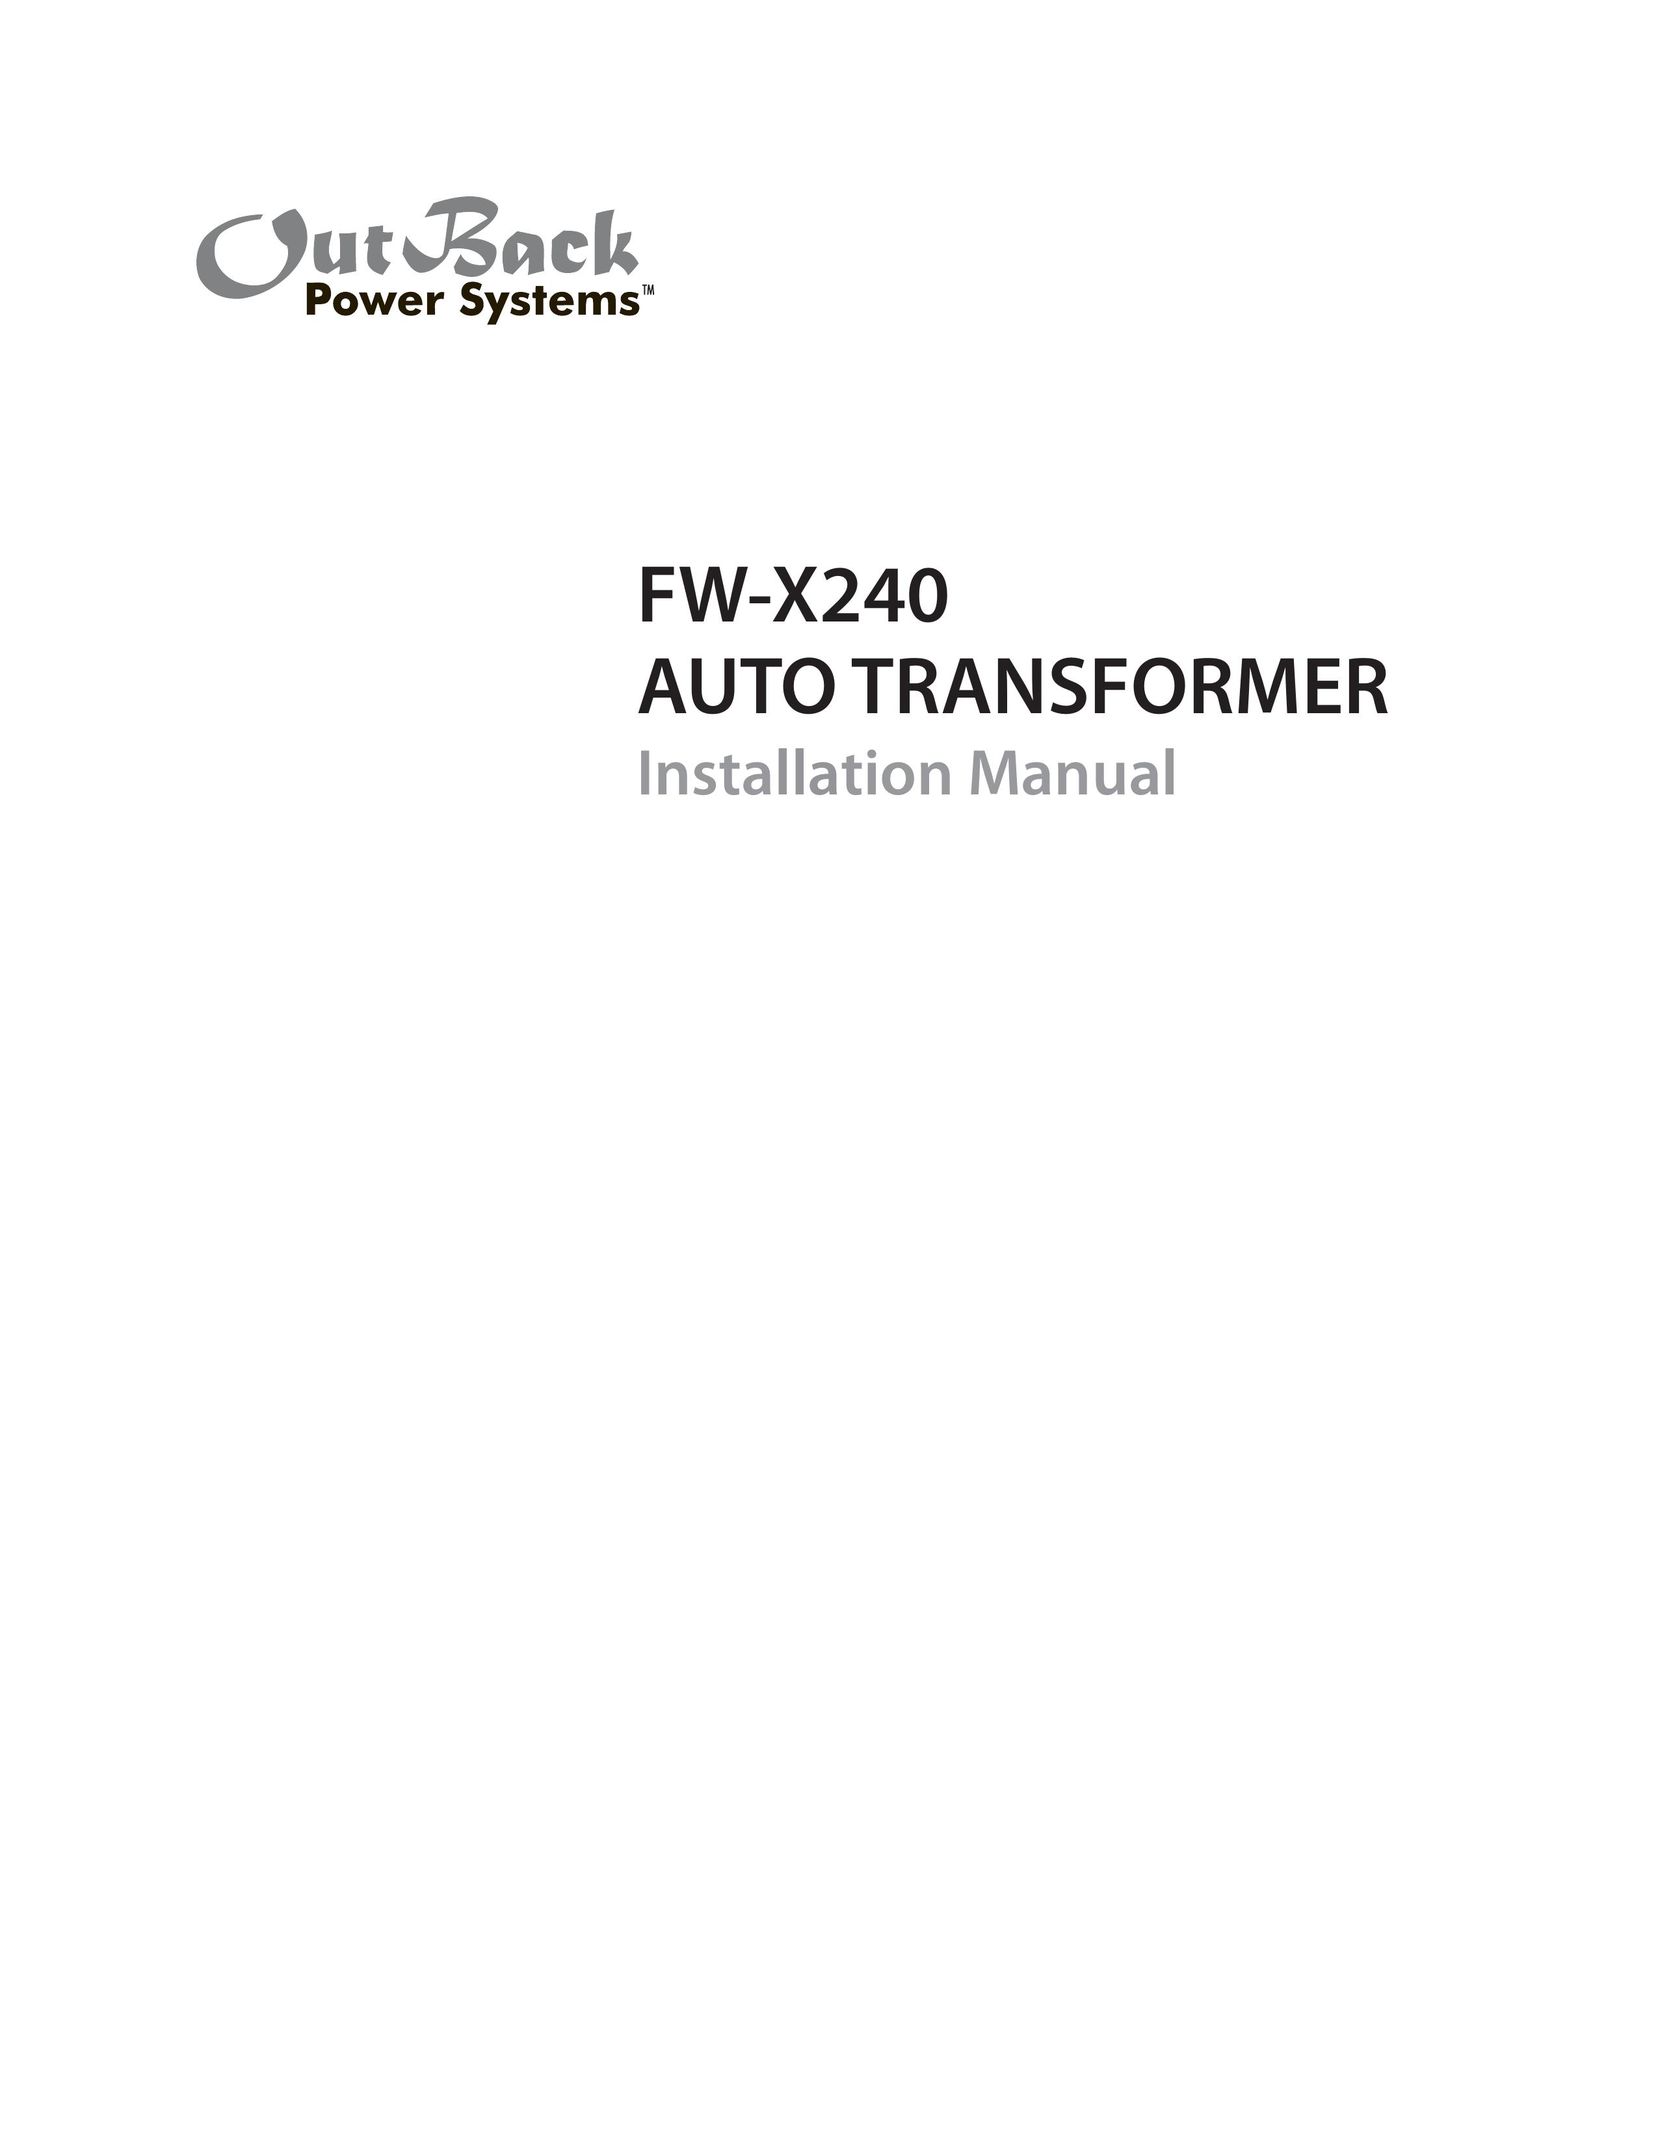 Outback Power Systems FW-X240 Power Supply User Manual